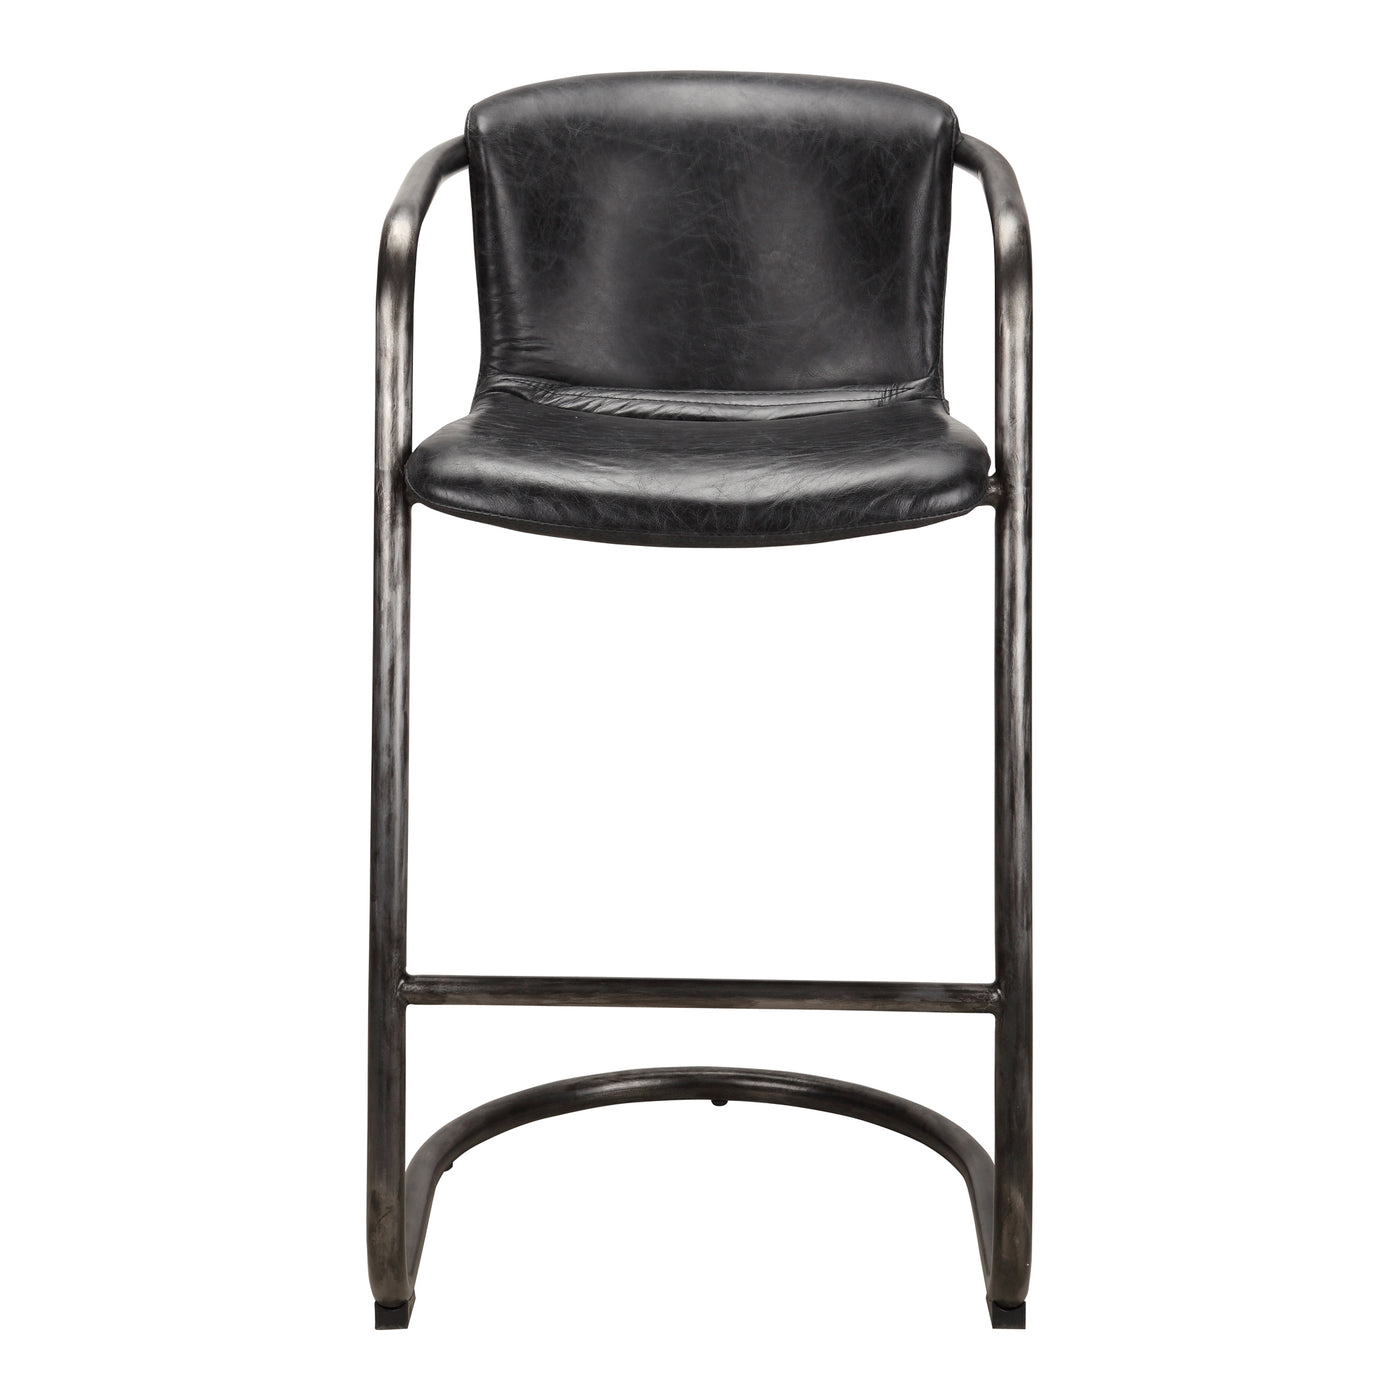 With thoughtful design, the Freeman barstool showcases a top-grain cowhide leather that will age beautifully. Its modern-i...